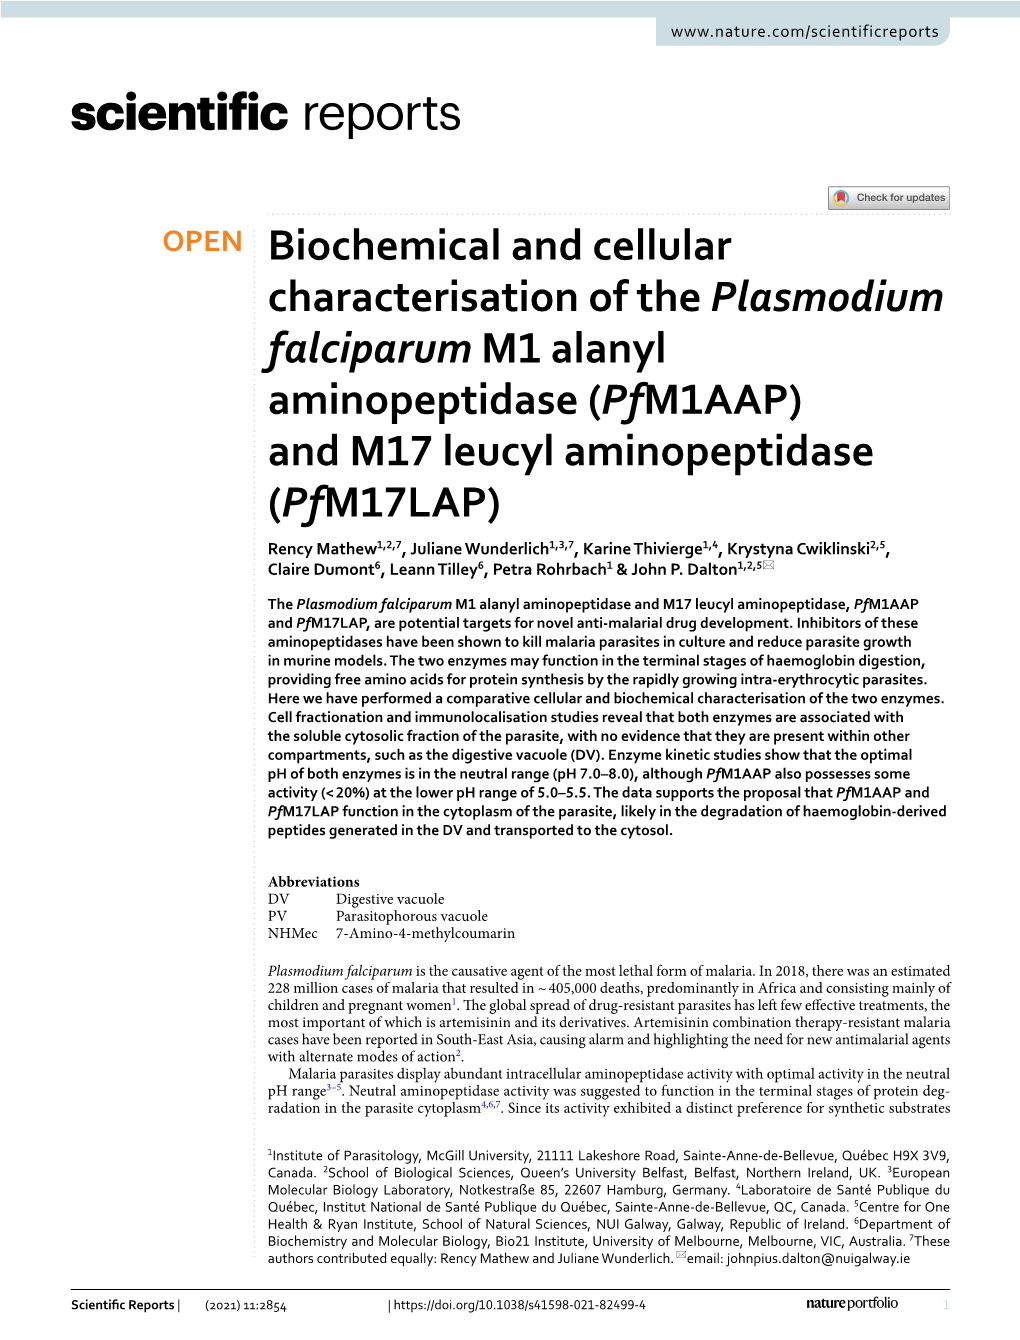 Biochemical and Cellular Characterisation of the Plasmodium Falciparum M1 Alanyl Aminopeptidase (Pfm1aap) and M17 Leucyl Aminope